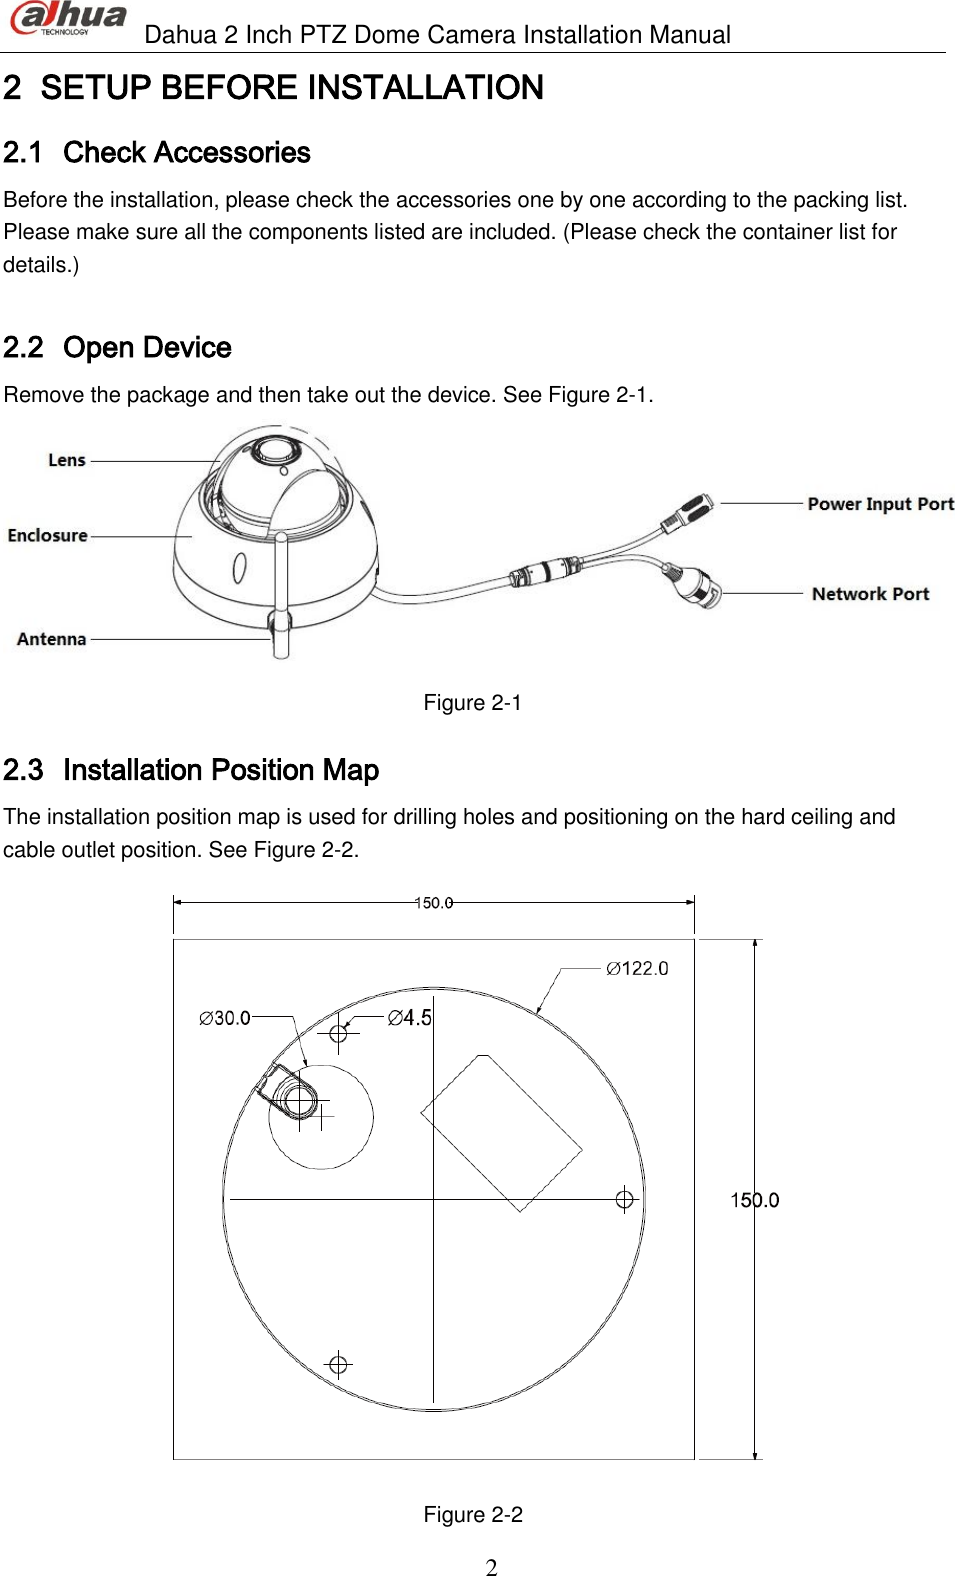                               Dahua 2 Inch PTZ Dome Camera Installation Manual  2 2 SETUP BEFORE INSTALLATION  2.1 Check Accessories  Before the installation, please check the accessories one by one according to the packing list. Please make sure all the components listed are included. (Please check the container list for details.)  2.2 Open Device   Remove the package and then take out the device. See Figure 2-1.  Figure 2-1 2.3 Installation Position Map  The installation position map is used for drilling holes and positioning on the hard ceiling and cable outlet position. See Figure 2-2.  Figure 2-2 